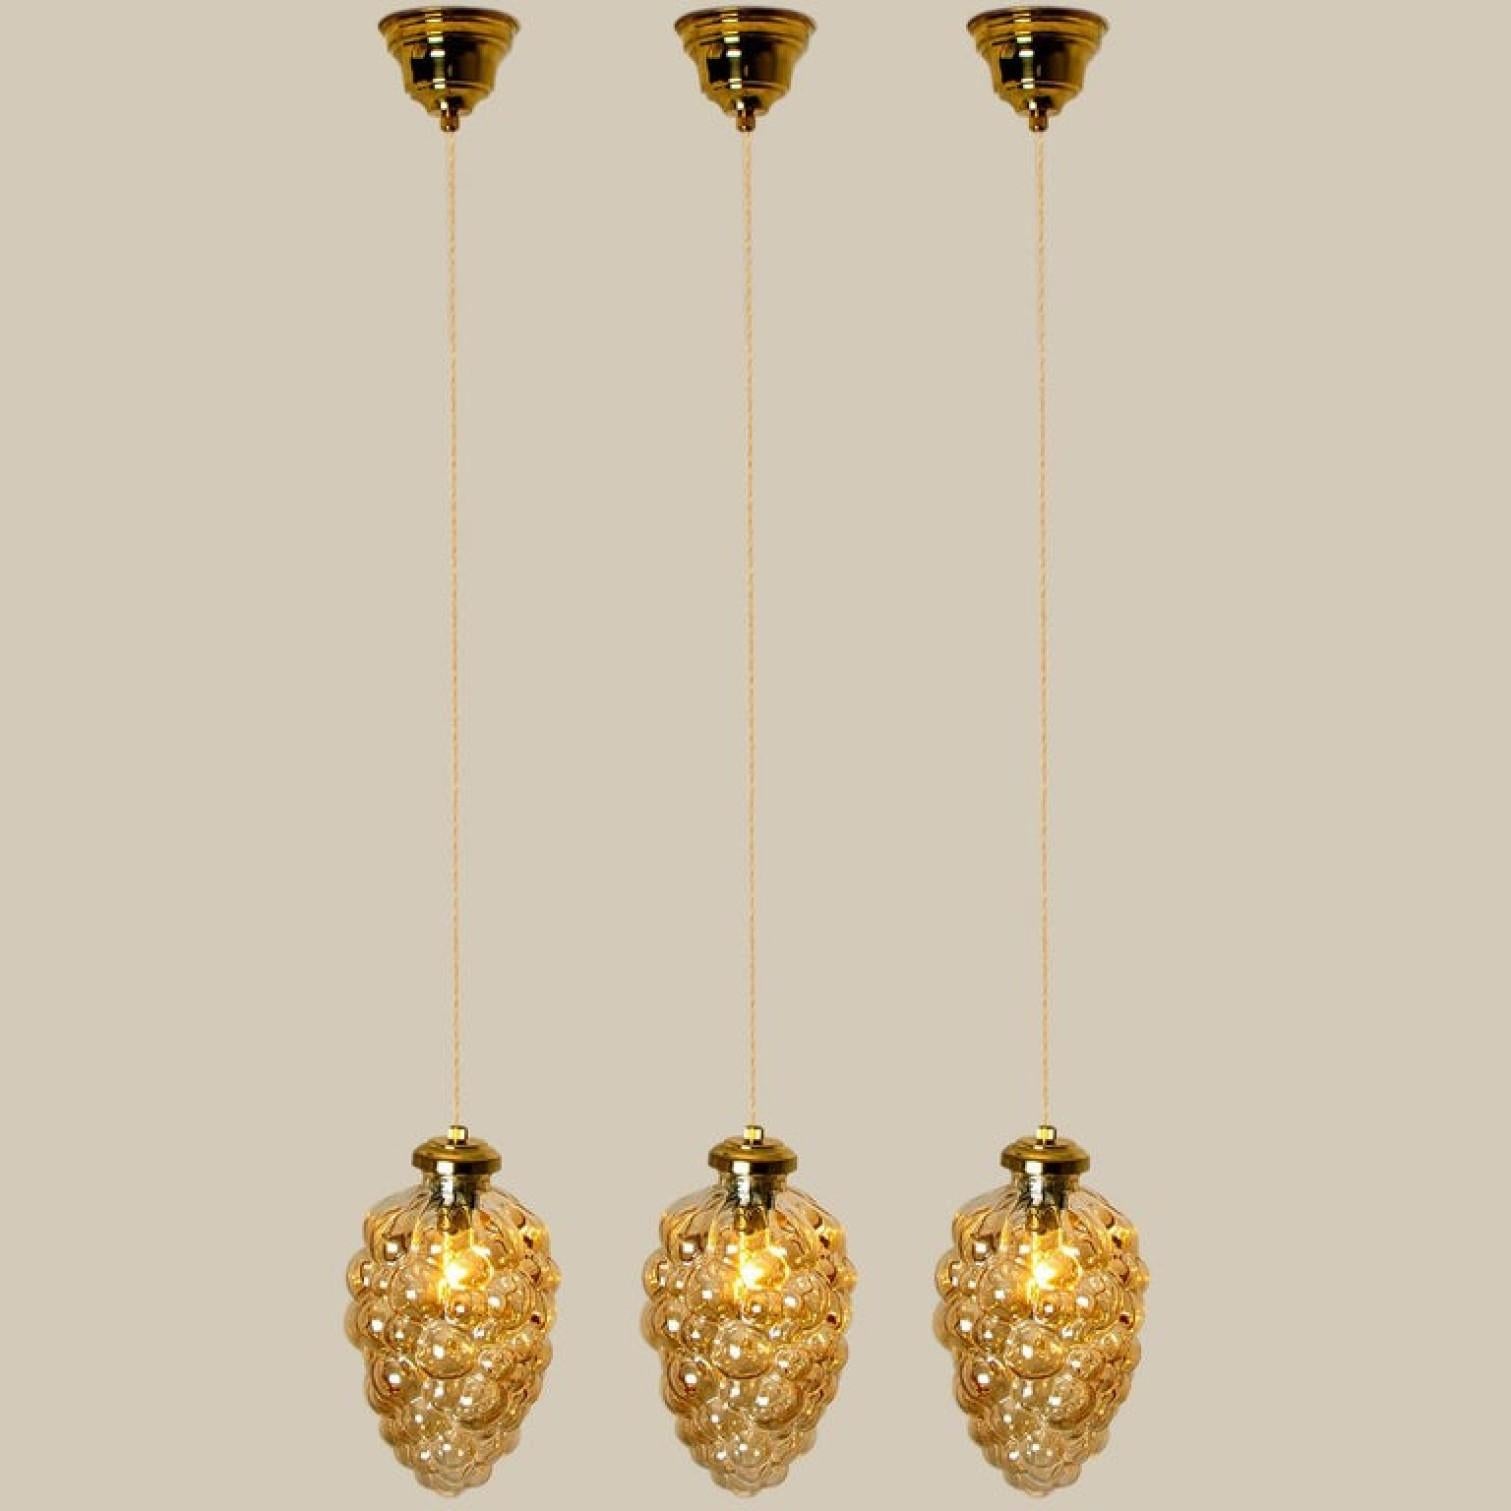 A set of amazing hand blown pendant light fixtures by Helana Tynell. Beautiful craftsmanship from the 20th century.
Illuminates beautifully

This lamps can be used for a room, a stunning staircase, or to decorate a corner of your home. The cables